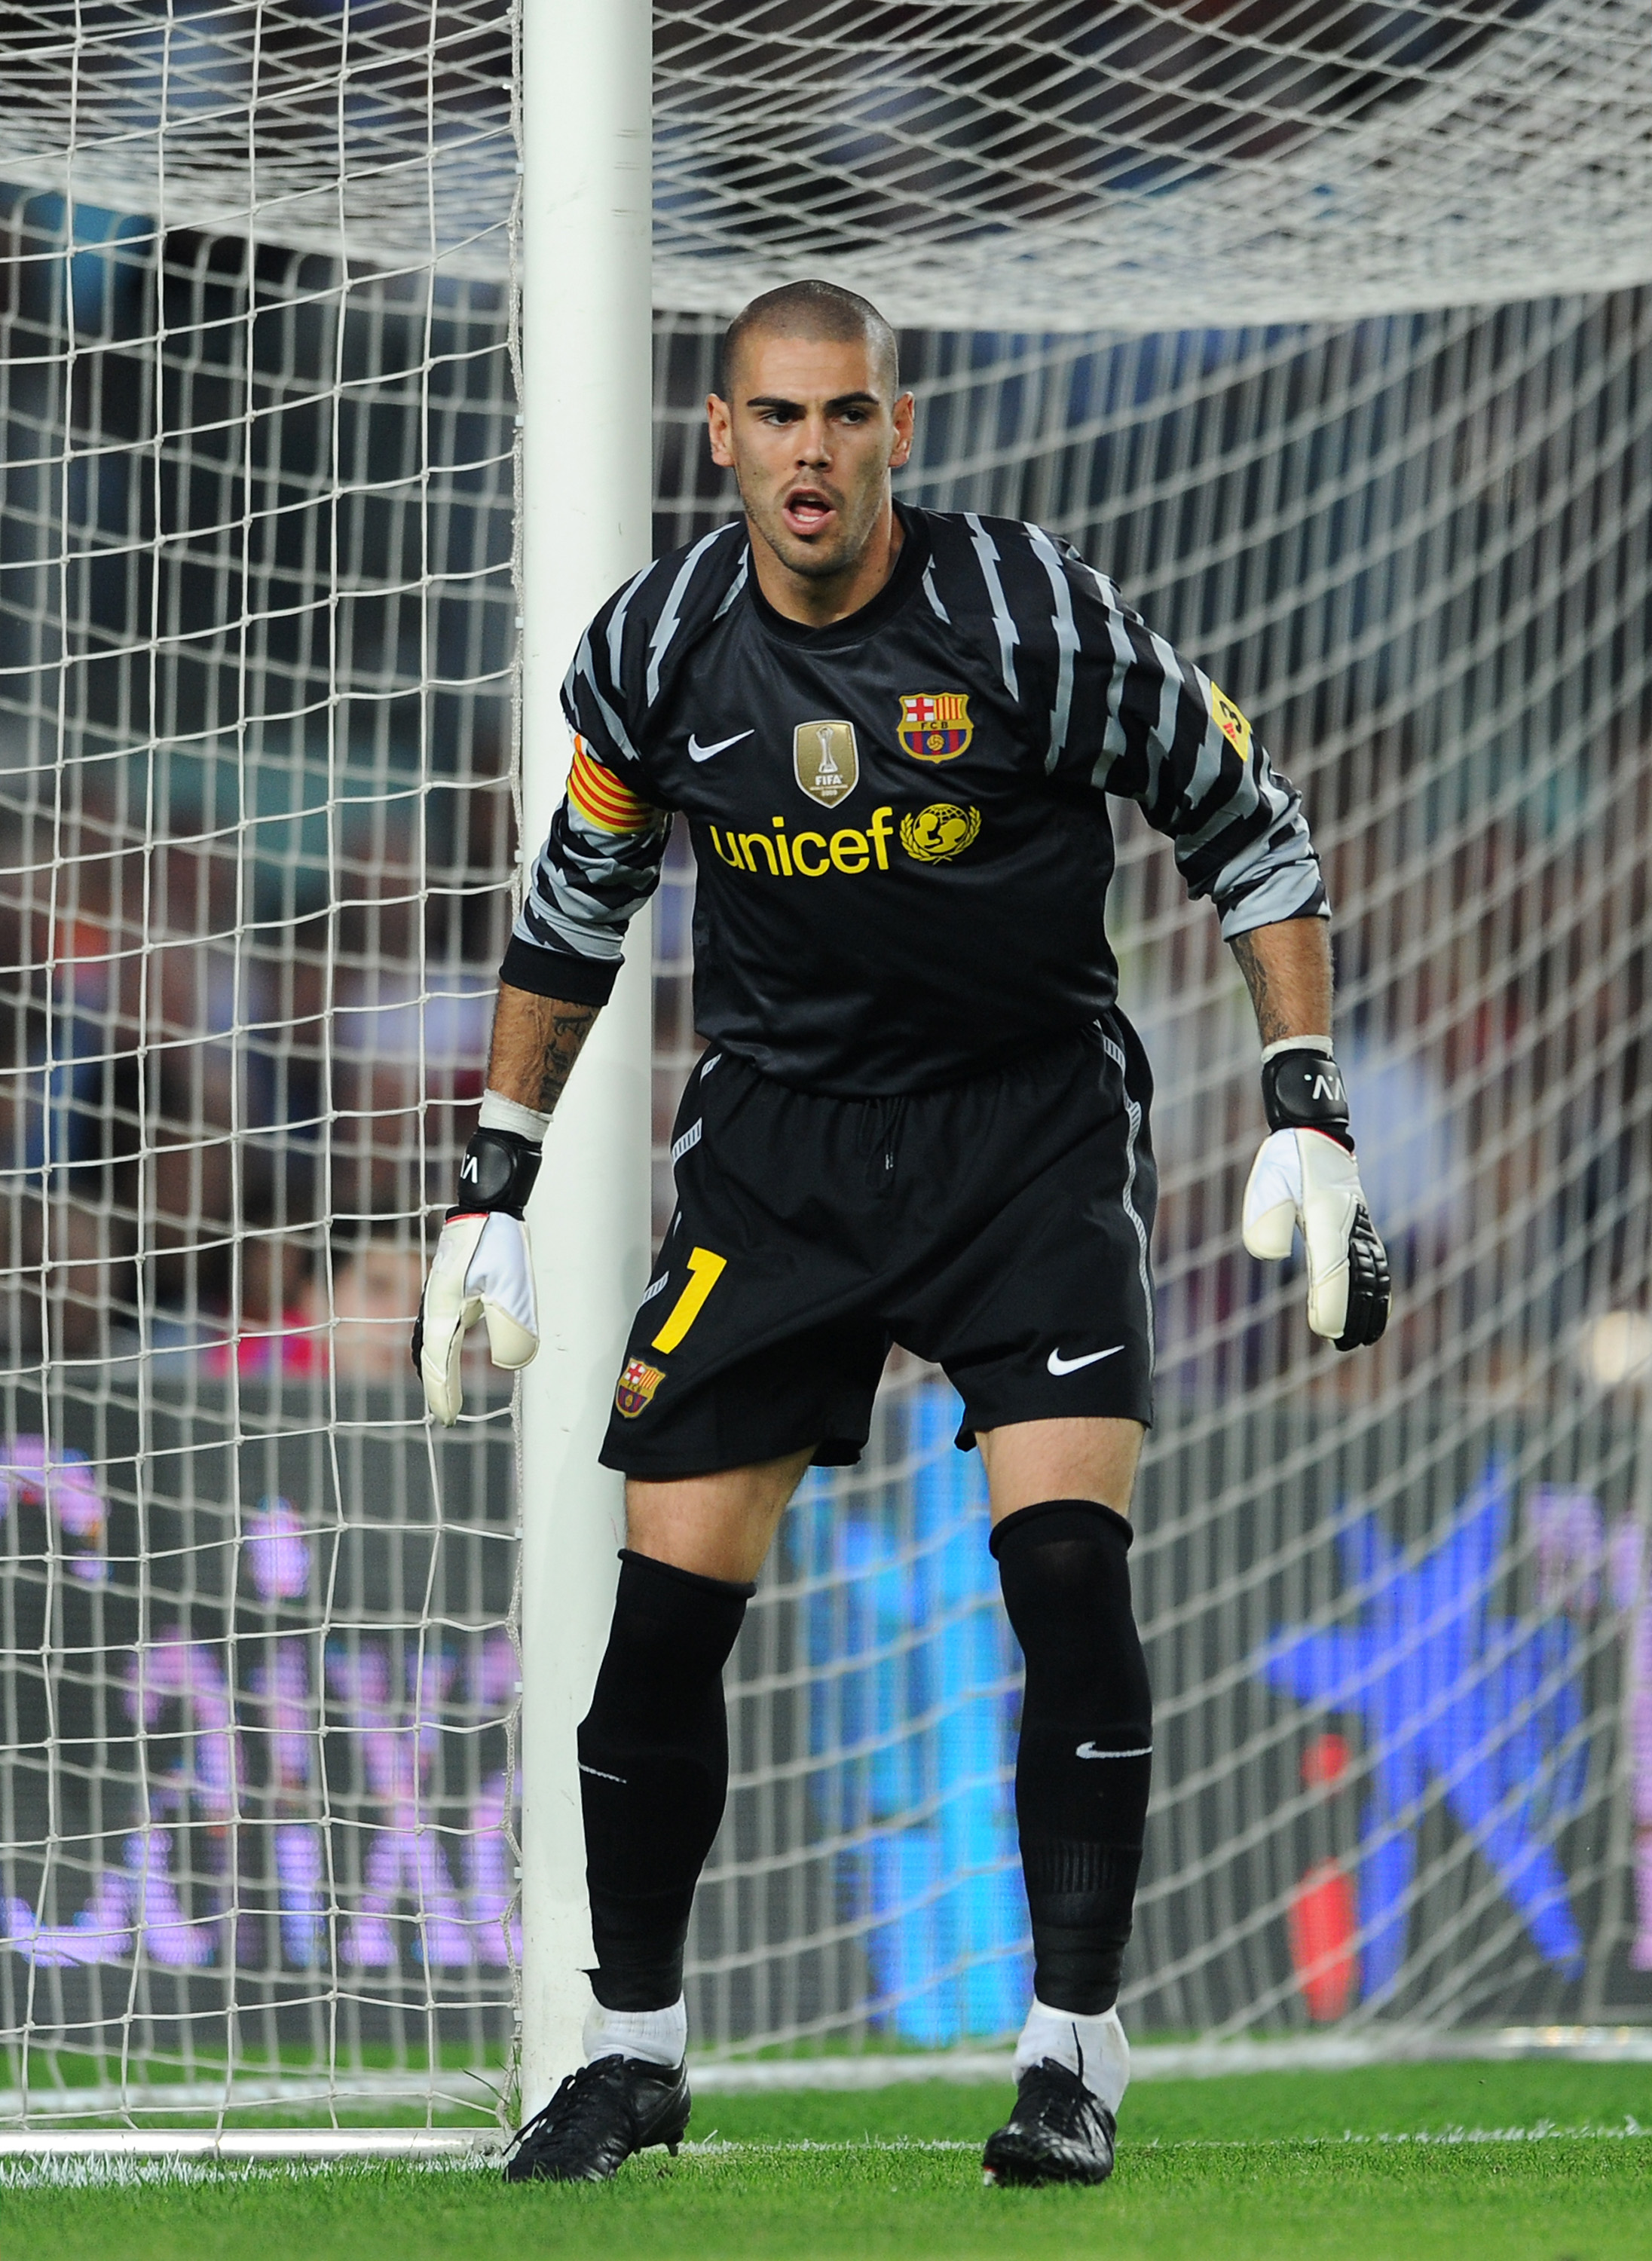 BARCELONA, SPAIN - OCTOBER 03:  Goalkeeper Victor Valdes of Barcelona follows the game during the La Liga match between Barcelona and Mallorca at the Camp Nou stadium on October 3, 2010 in Barcelona, Spain. The match ended in a 1-1 draw.  (Photo by Jasper